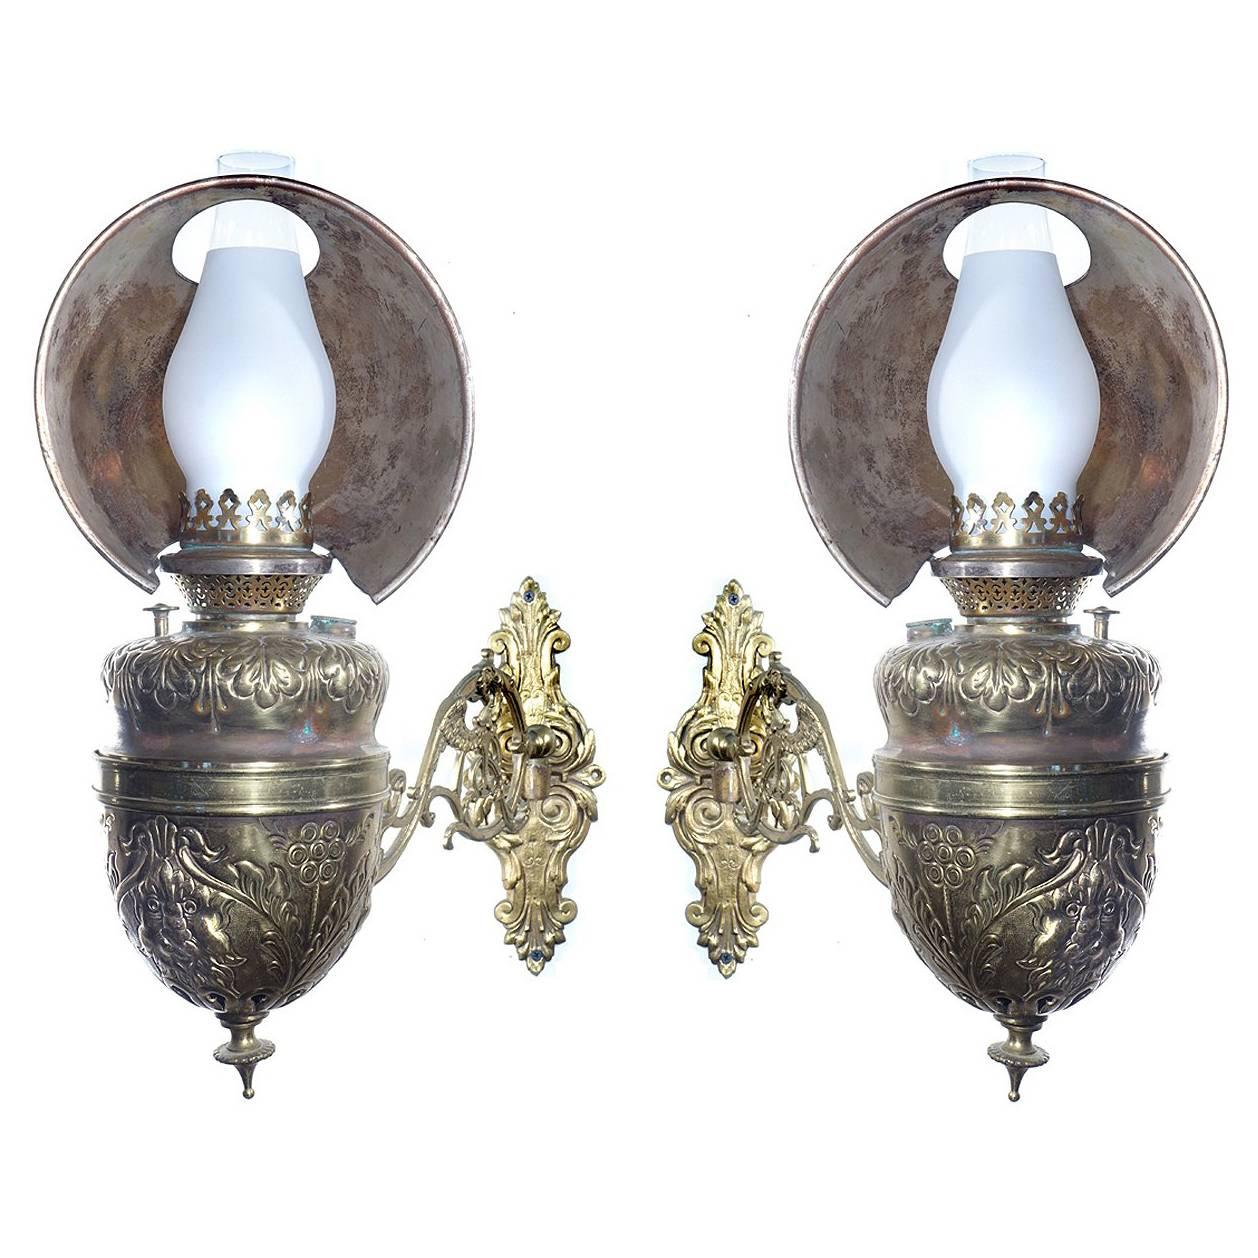 Matching Pair of Ornate 1800s Pullman Sconces